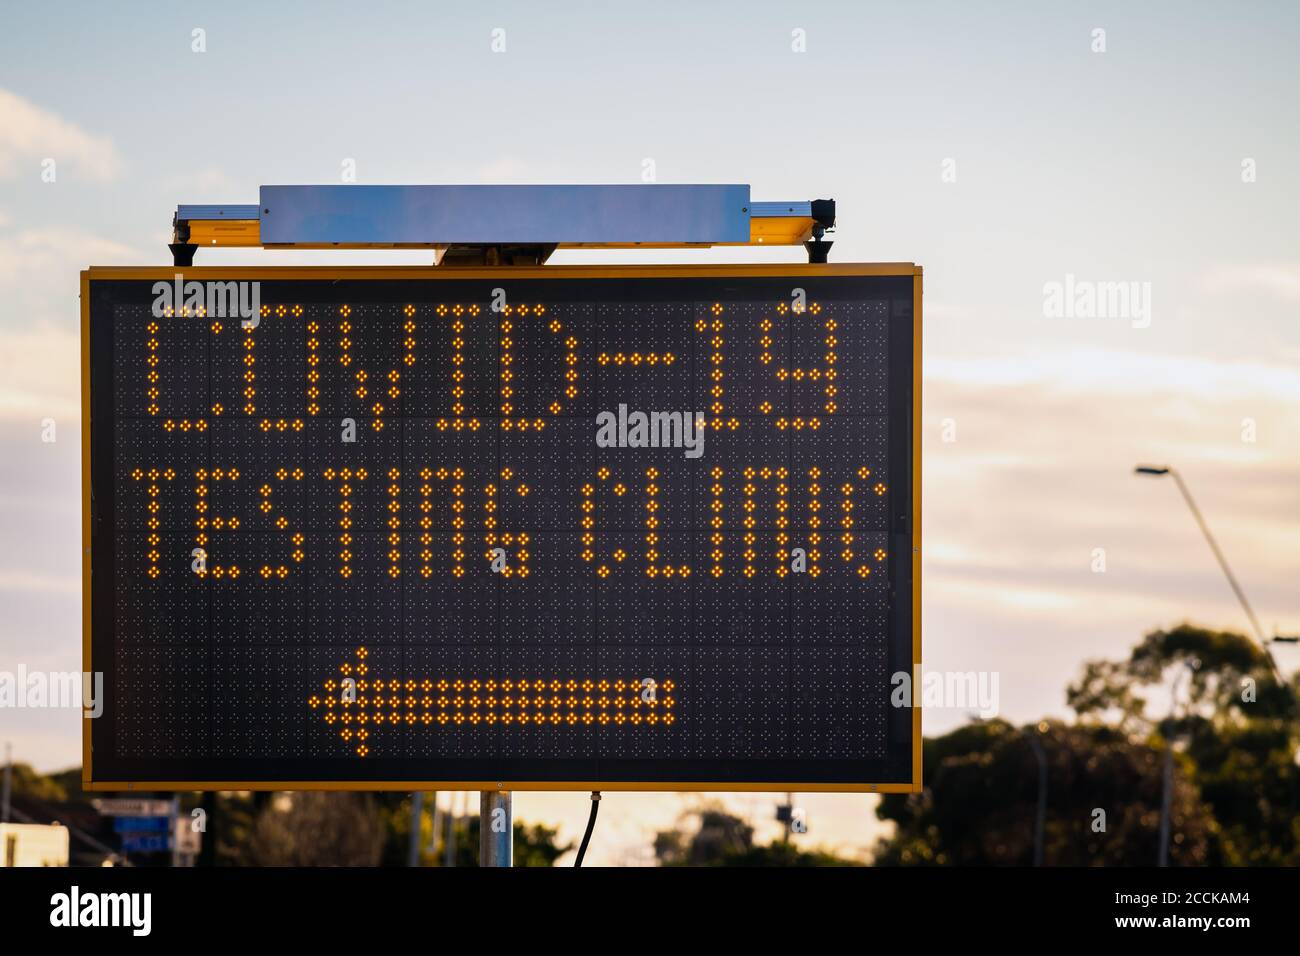 Covid-19 testing clinic digital road sign in South Australia Stock Photo